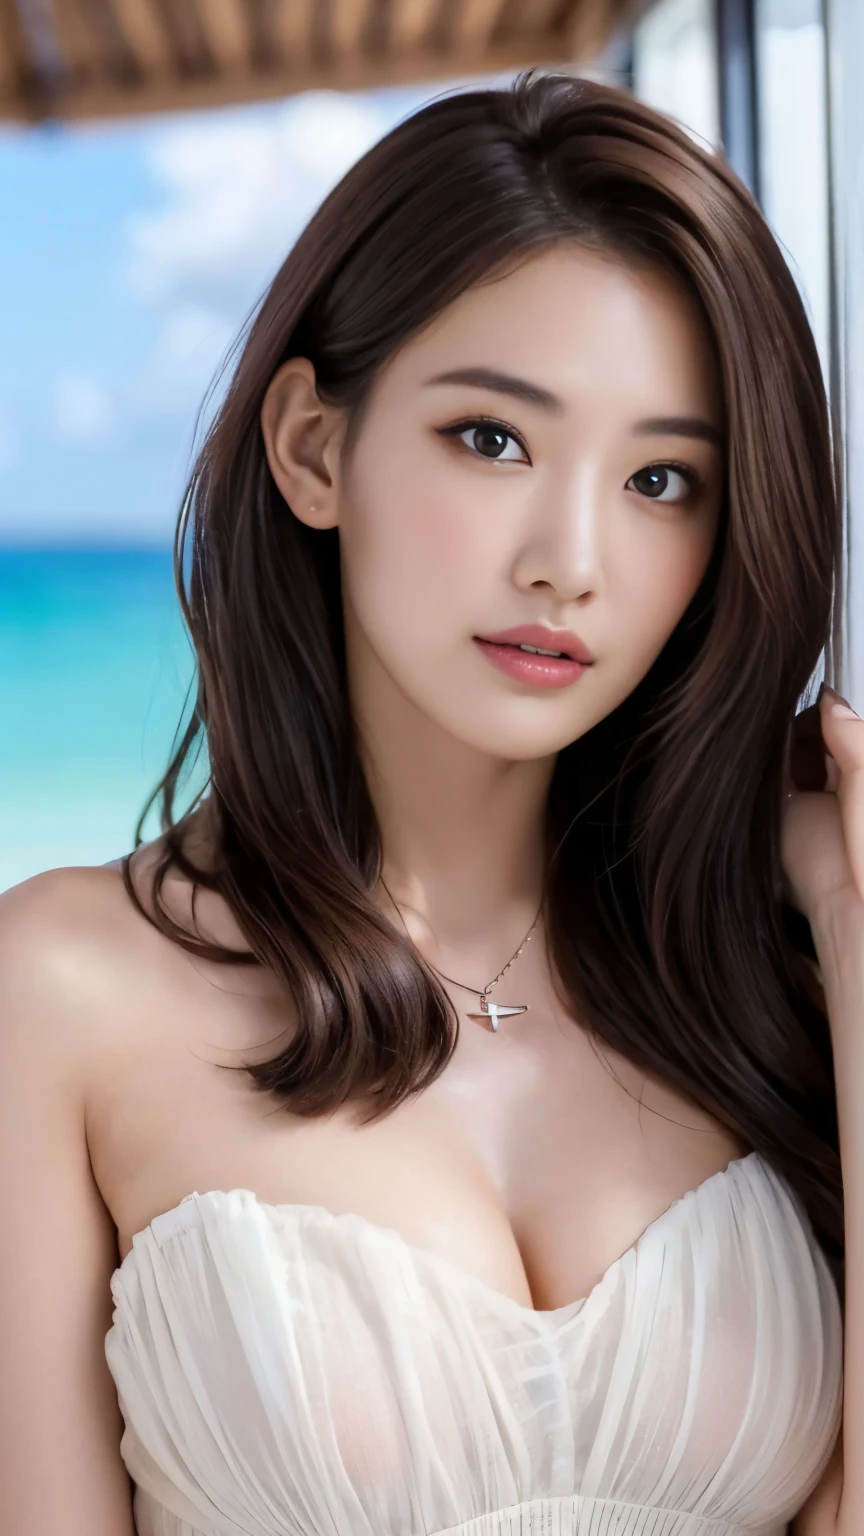 ((genuineライティング、highest quality、8K、masterpiece:1.3))、8K、clear focus:1.2、NSFW、（nude:1.5）、((genuine)) 、((genuine light、highest quality) )、model body shape:1.4、(dark brown hair、outside:1.8)、dark brown eyes、long hair、resort、At Nangoku Hotel、(24-years-old:1.3)、super detailed face、fine eyes、double eyelid、necklace、Put your hair over one eye、high heels、eyeliner、comb hair、Blue sea view、liberation、model pose、、(NSFW:1.3)
